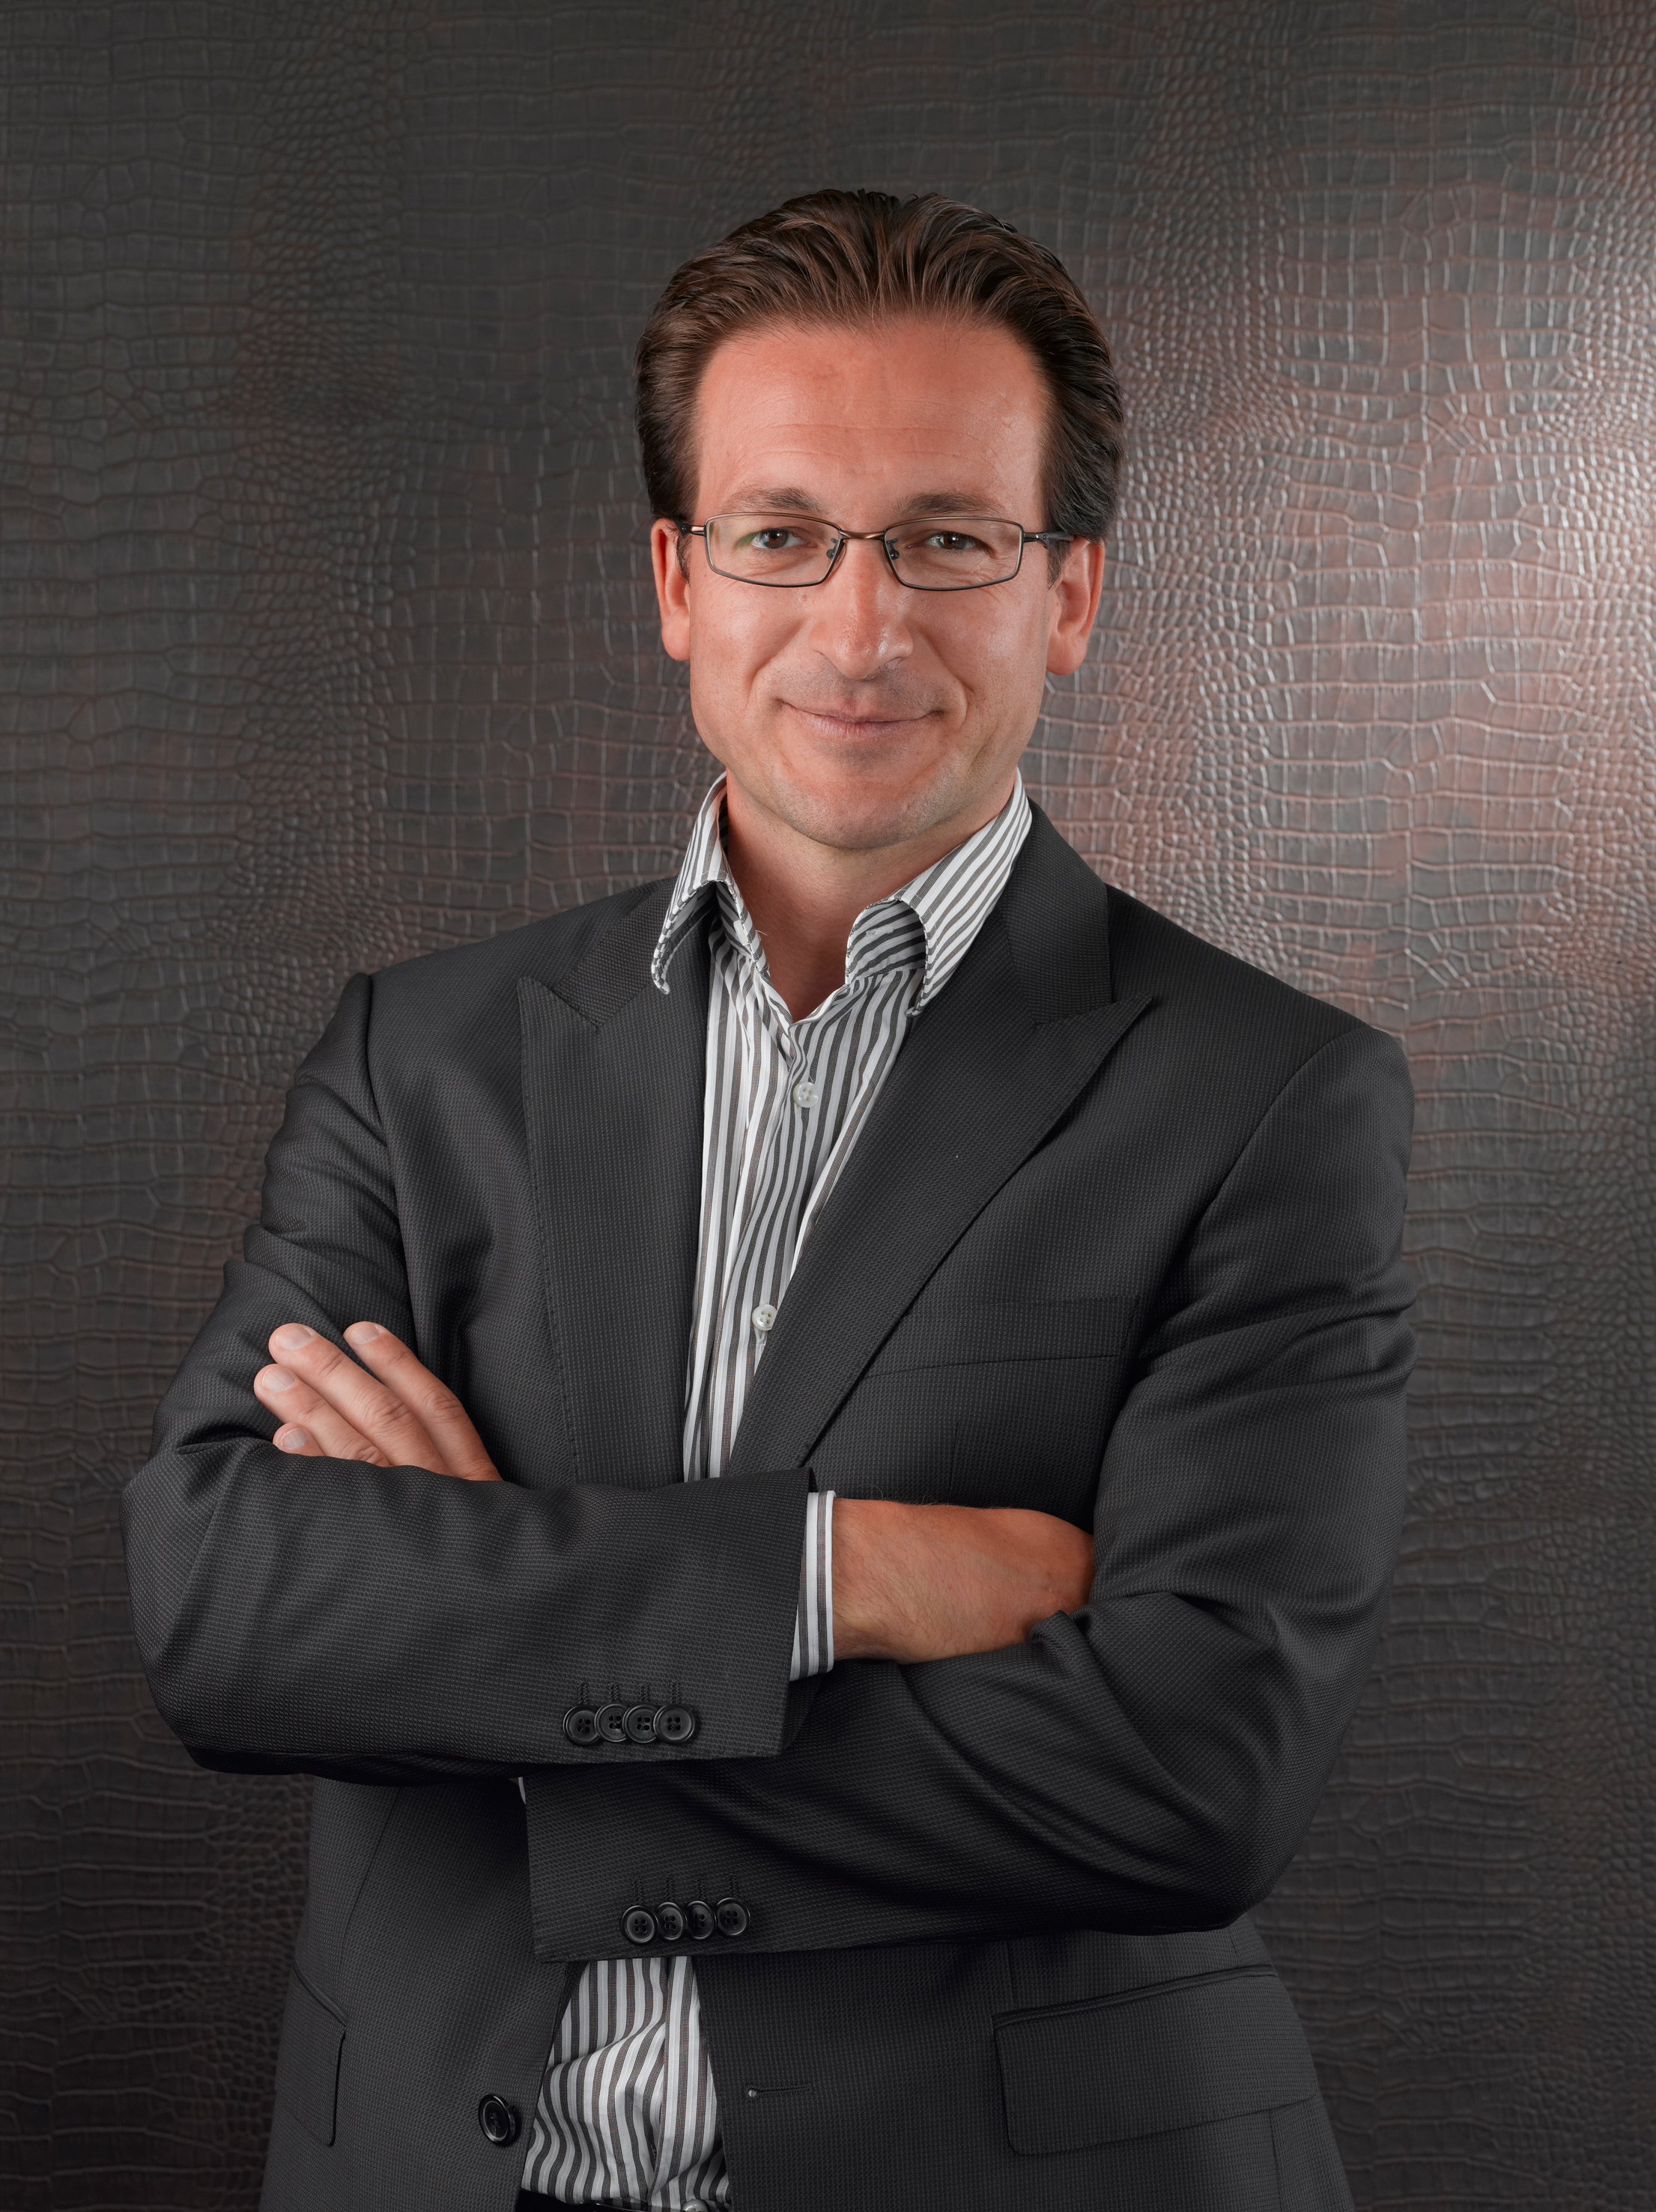 David Giraud, President of the group MGM Hotels et Résidences